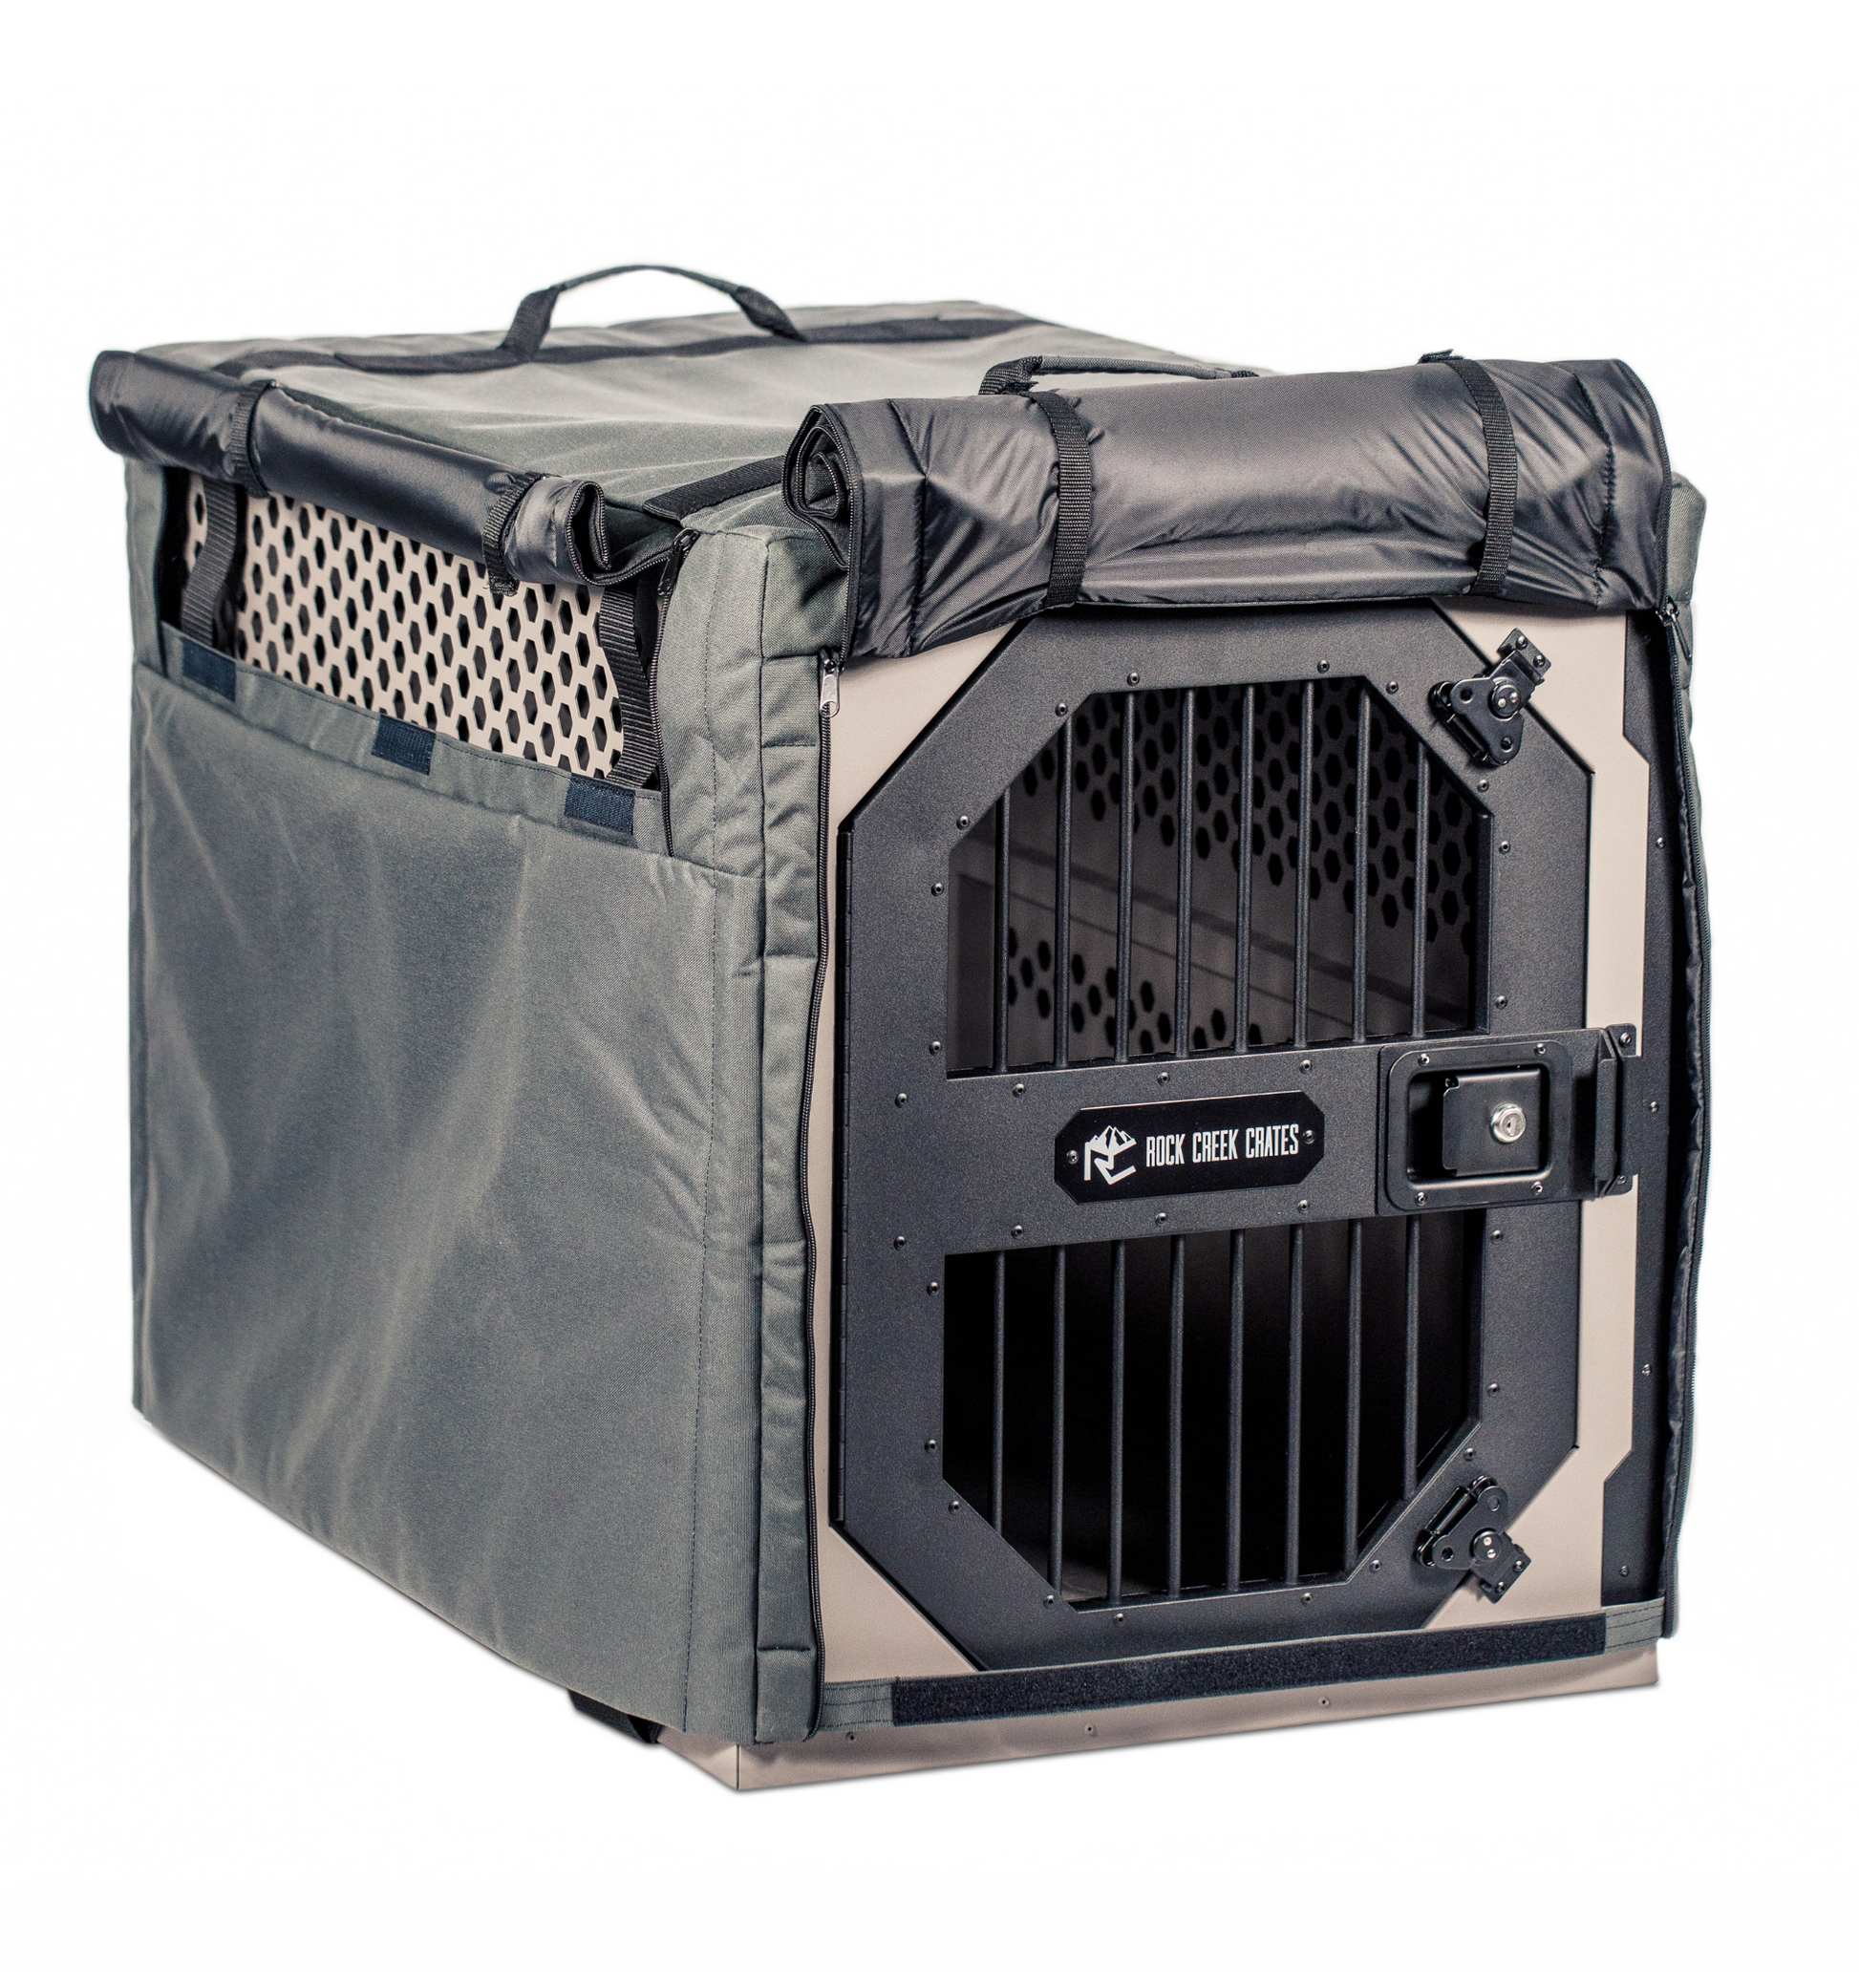 Top 5 Kennel Accessories to Make Your Dog's Kennel Feel More like